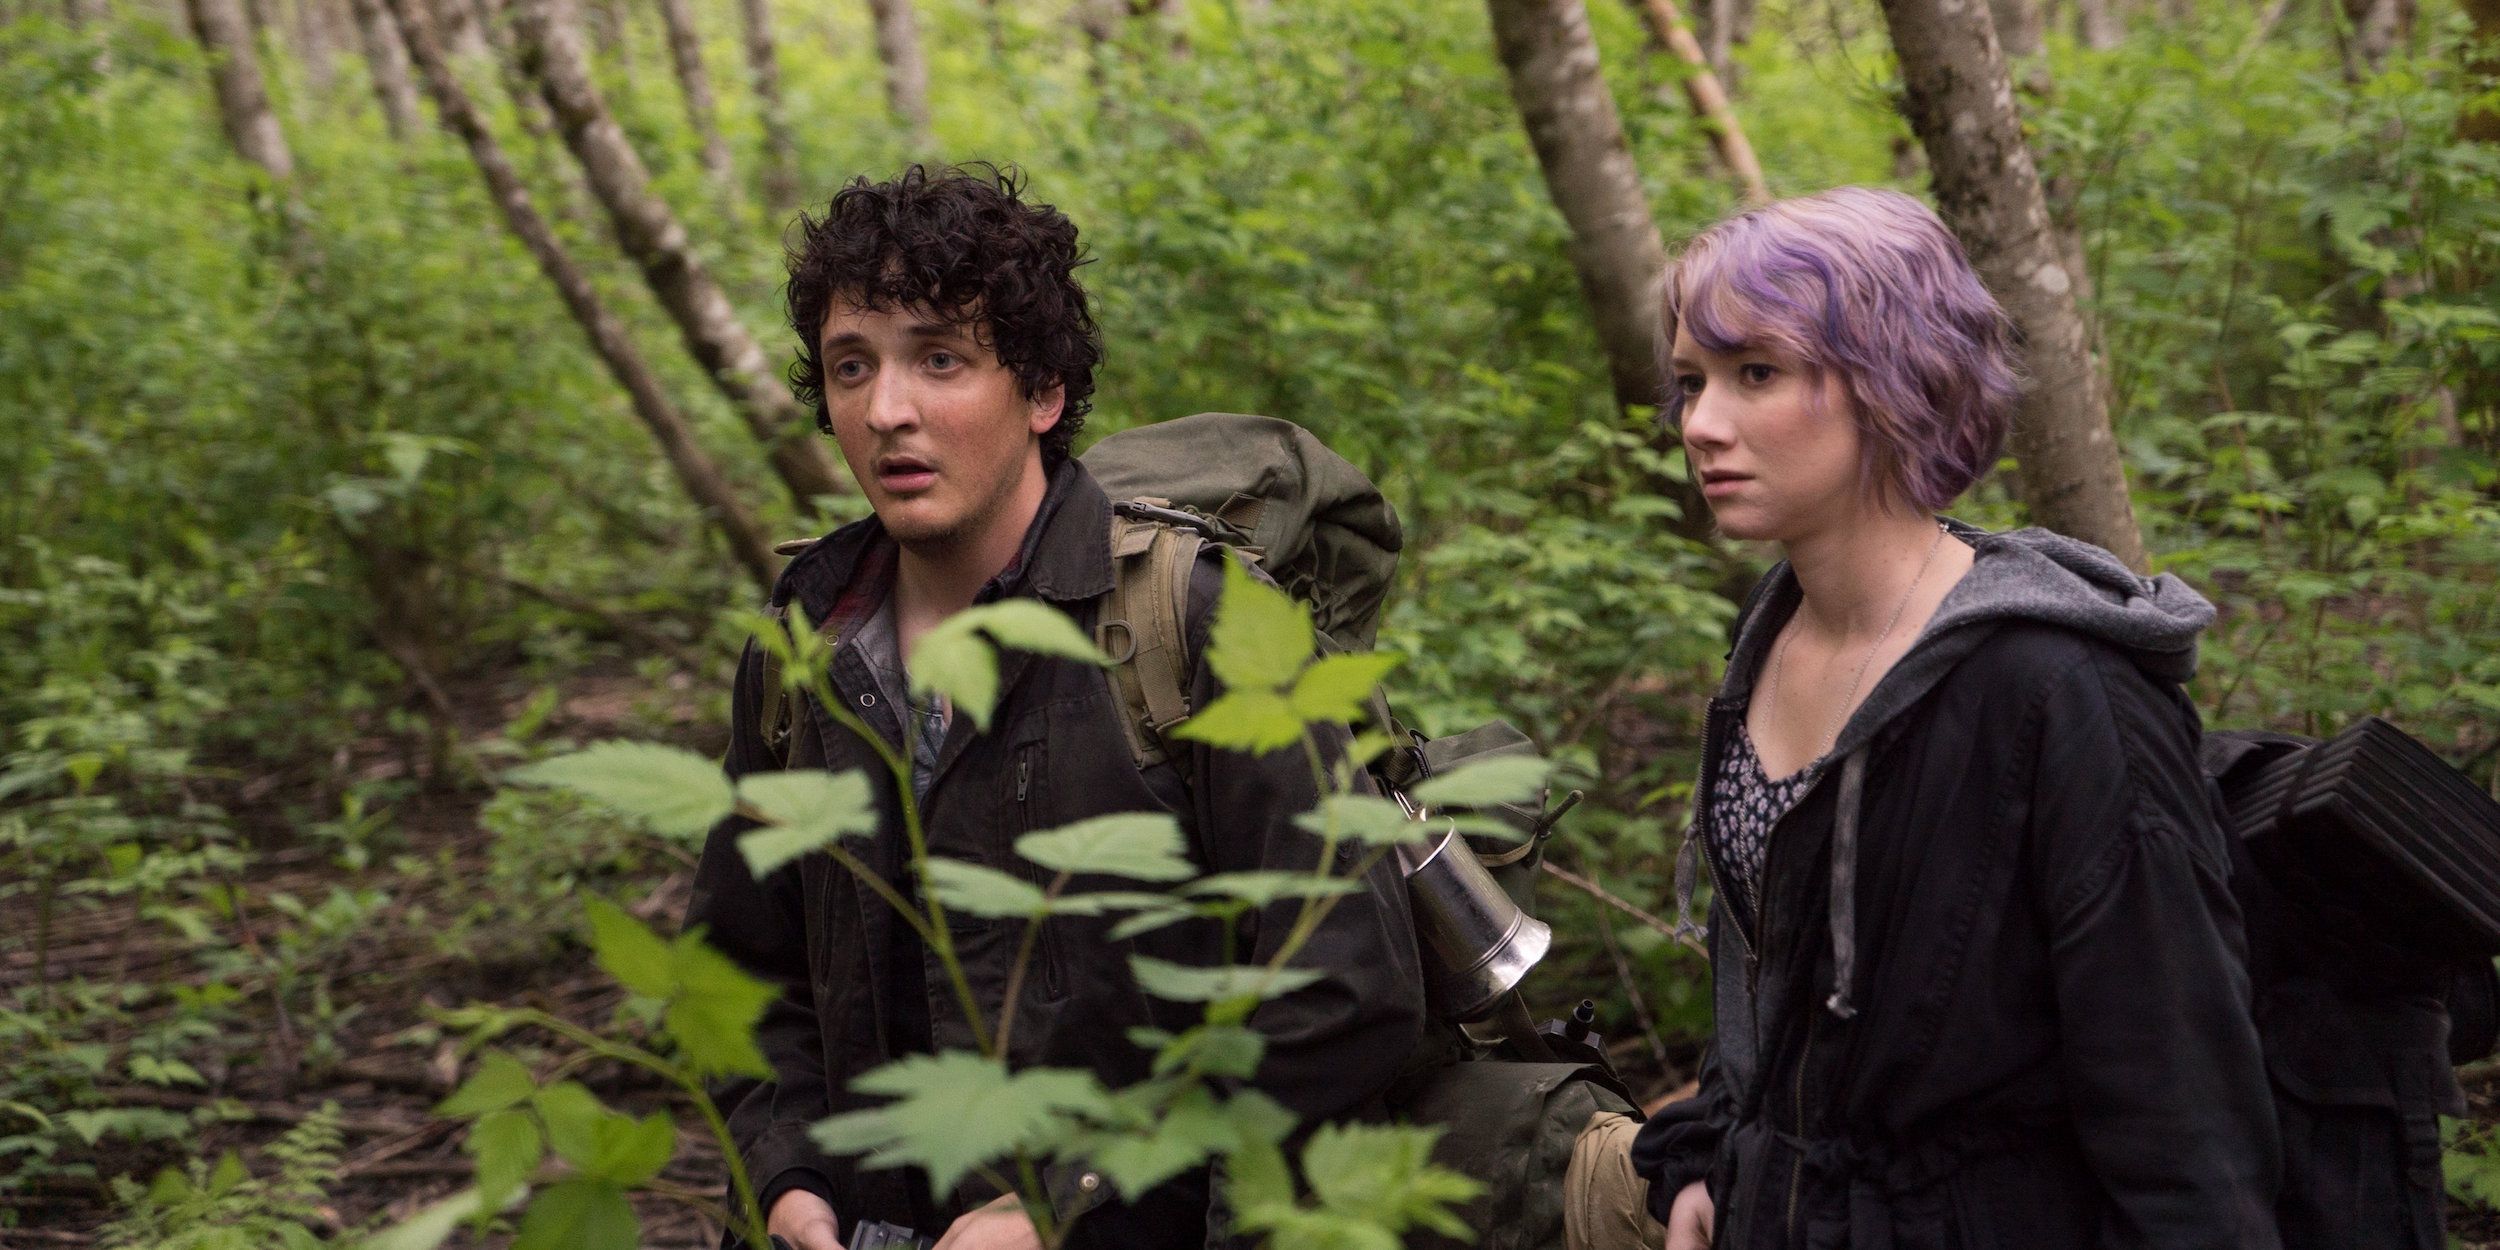 Wes Robinson as Lane and Valorie Curry as Talia in Blai